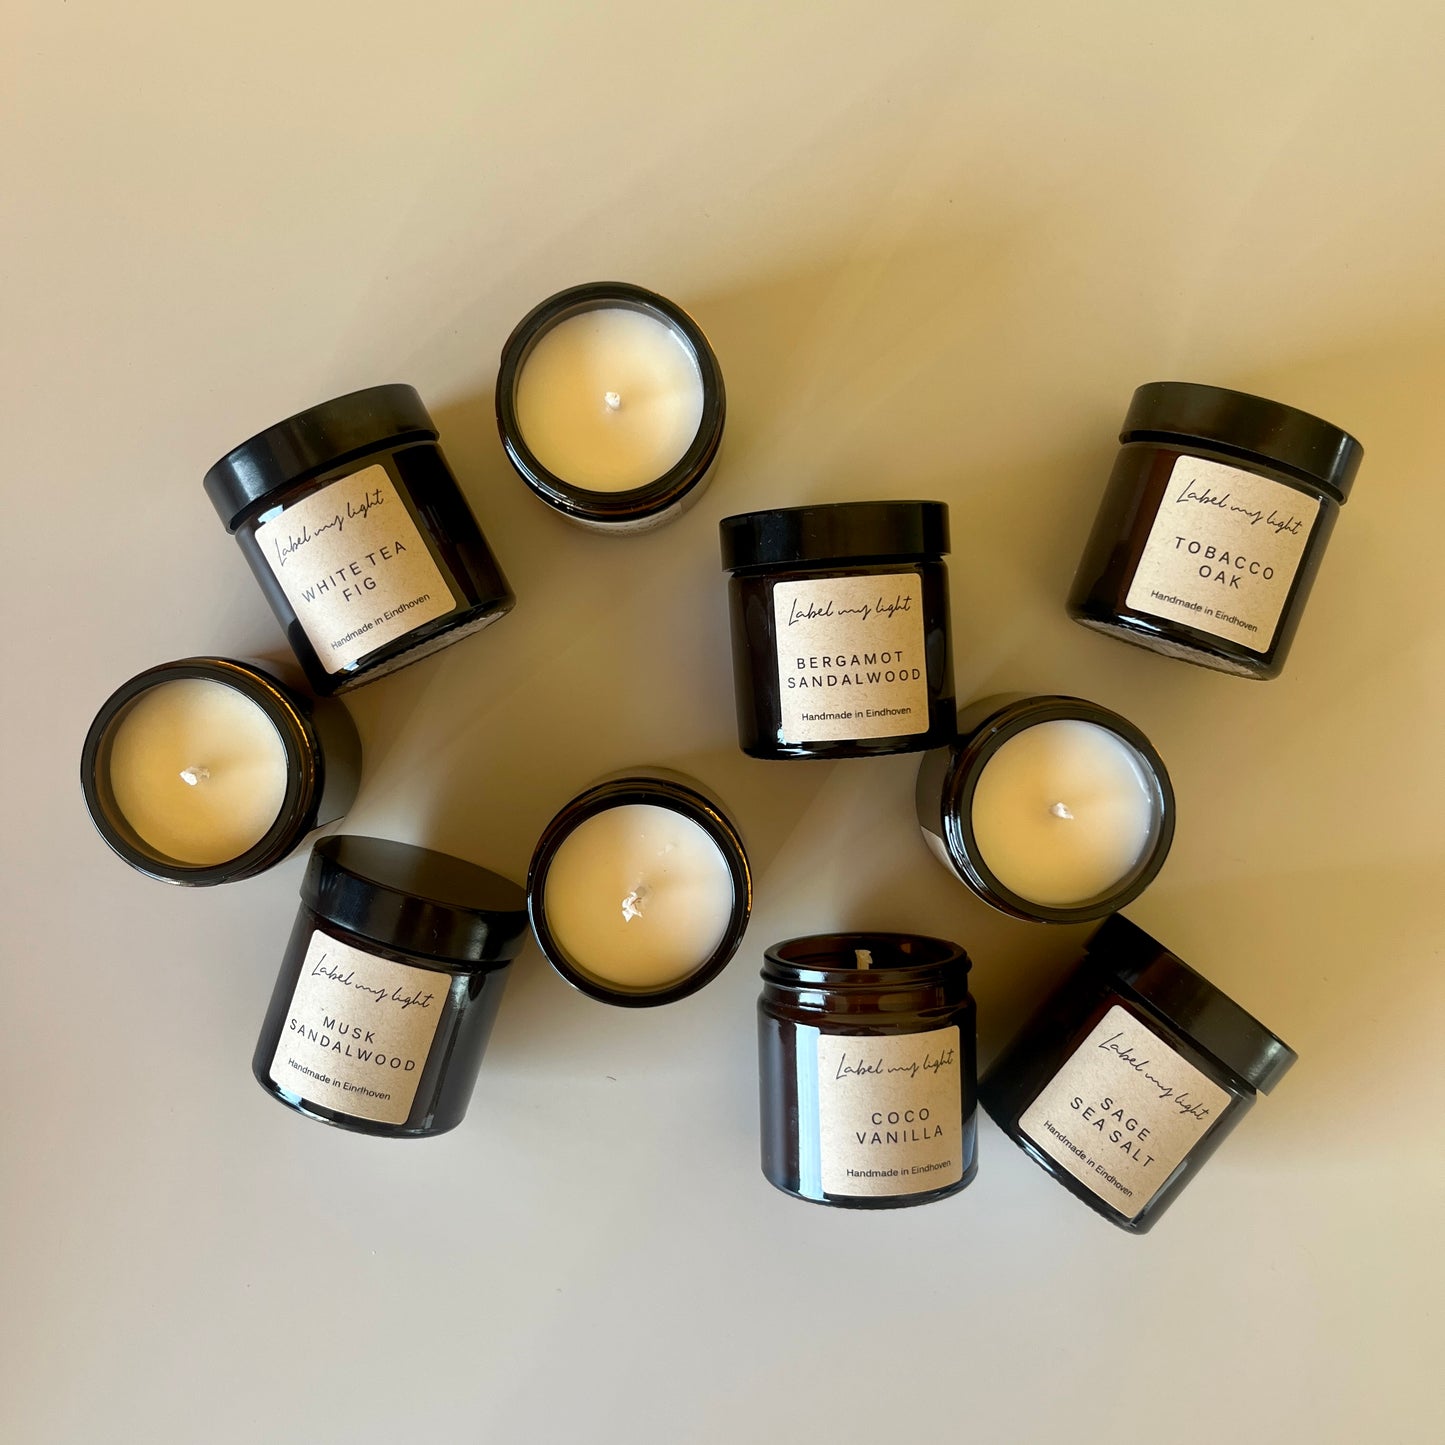 Scented candle samples